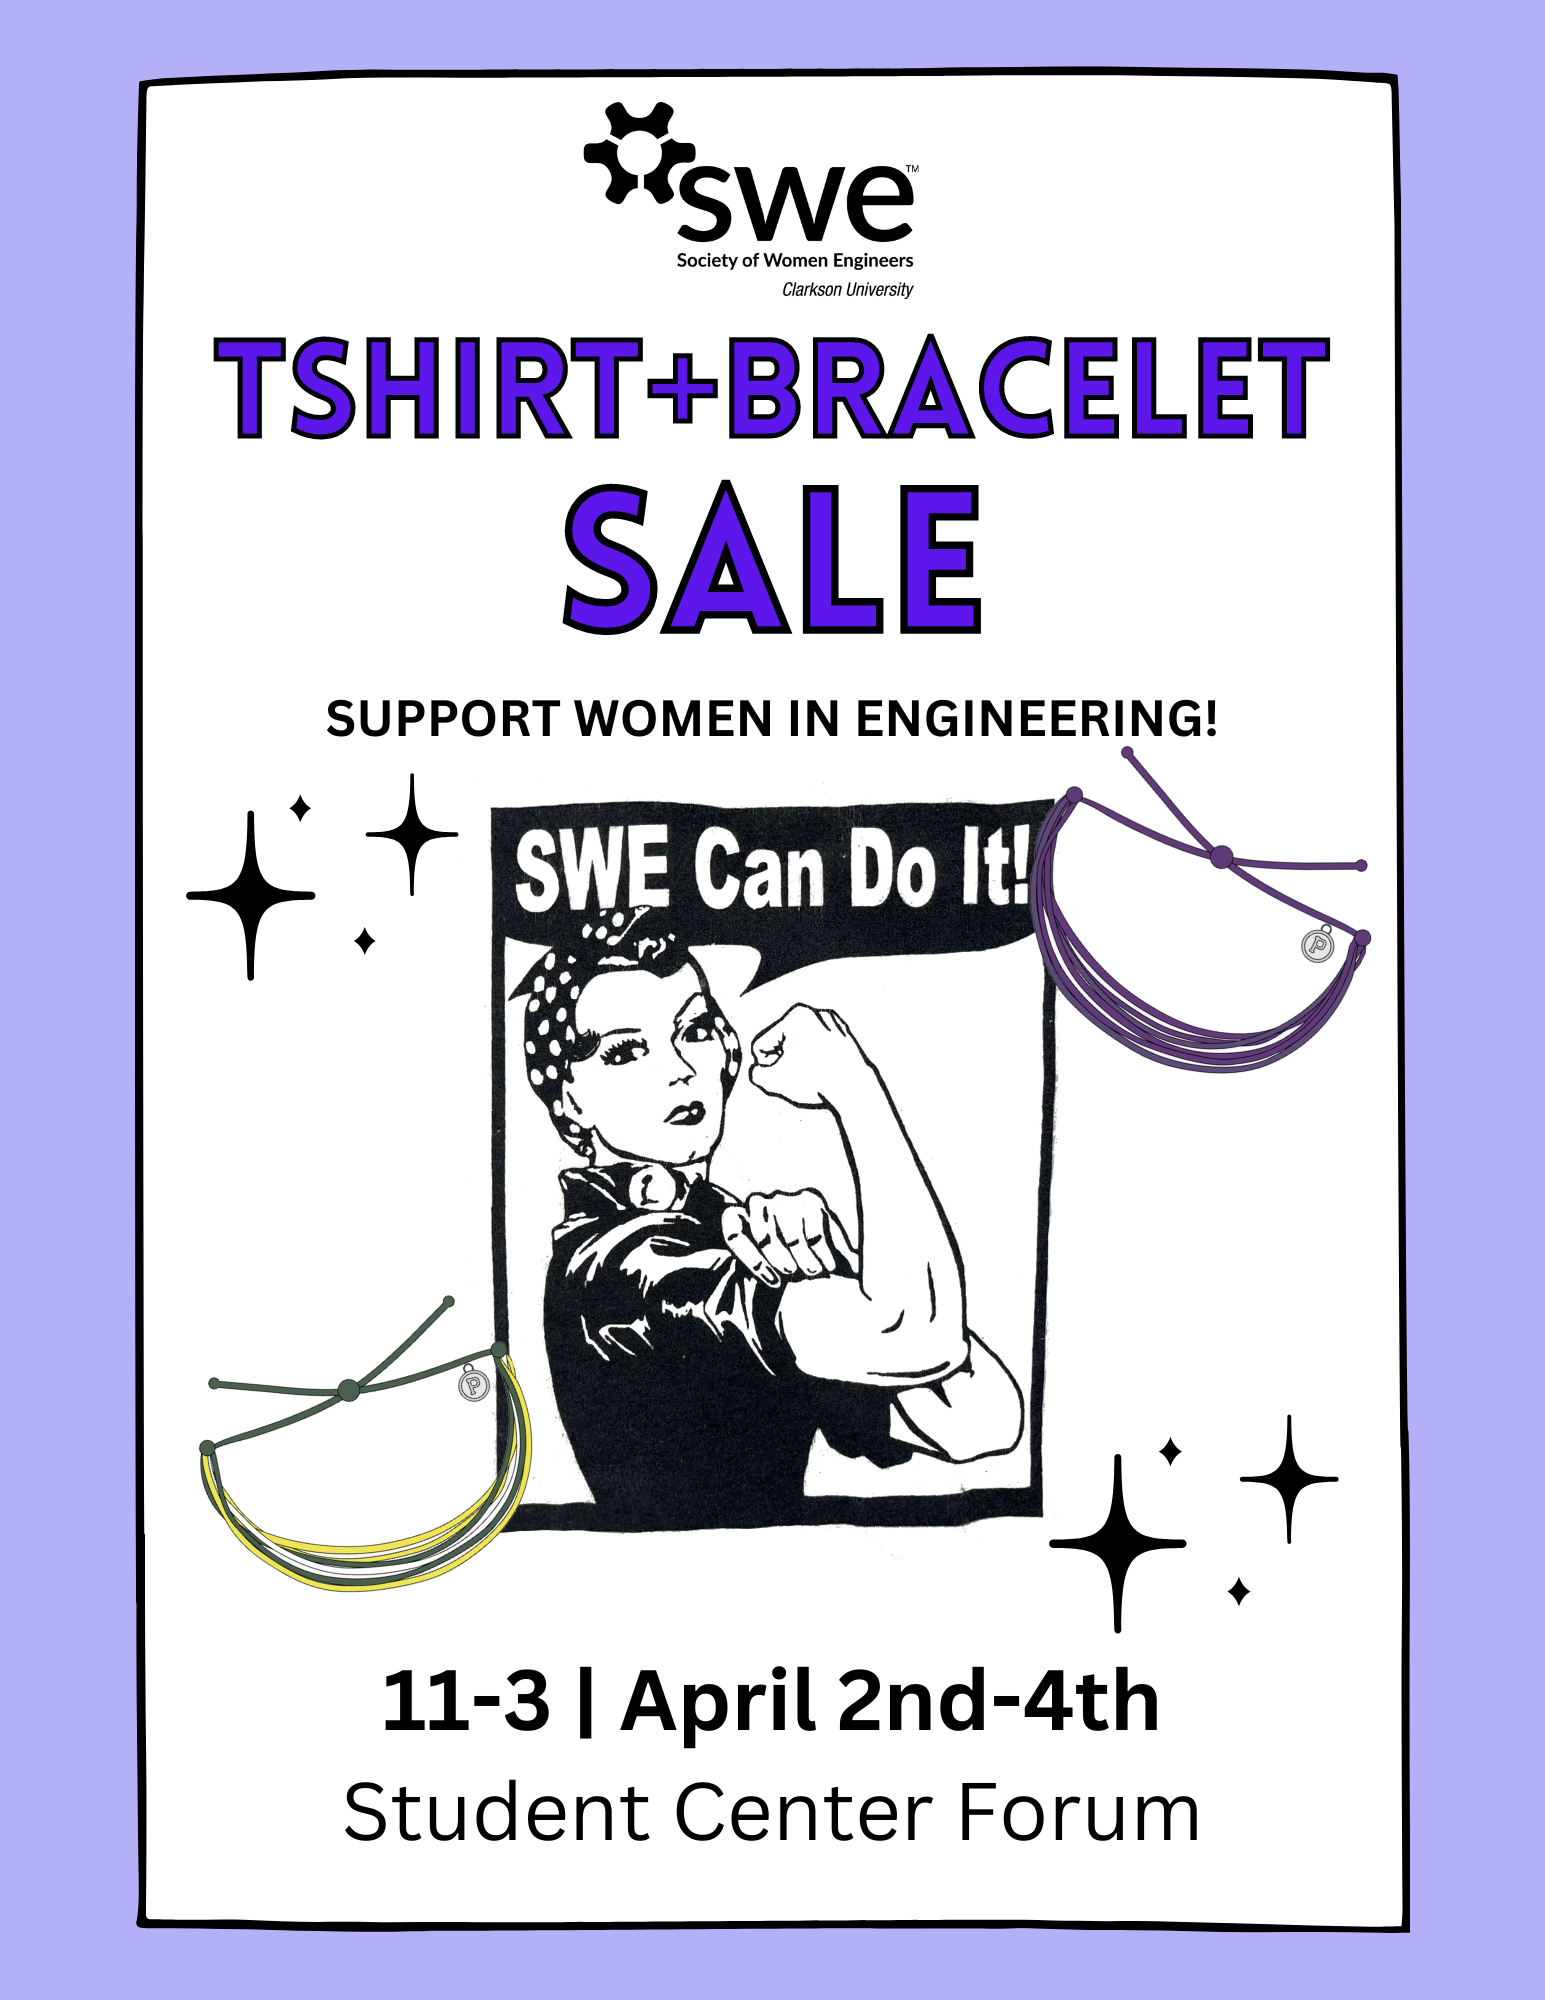 A promotional poster for a t-shirt and bracelet sale supporting women in engineering, featuring a "we can do it!" motif. The sale runs from April 2nd to April 4th at 11:00 to 3:00 in the Clarkson Student Center.